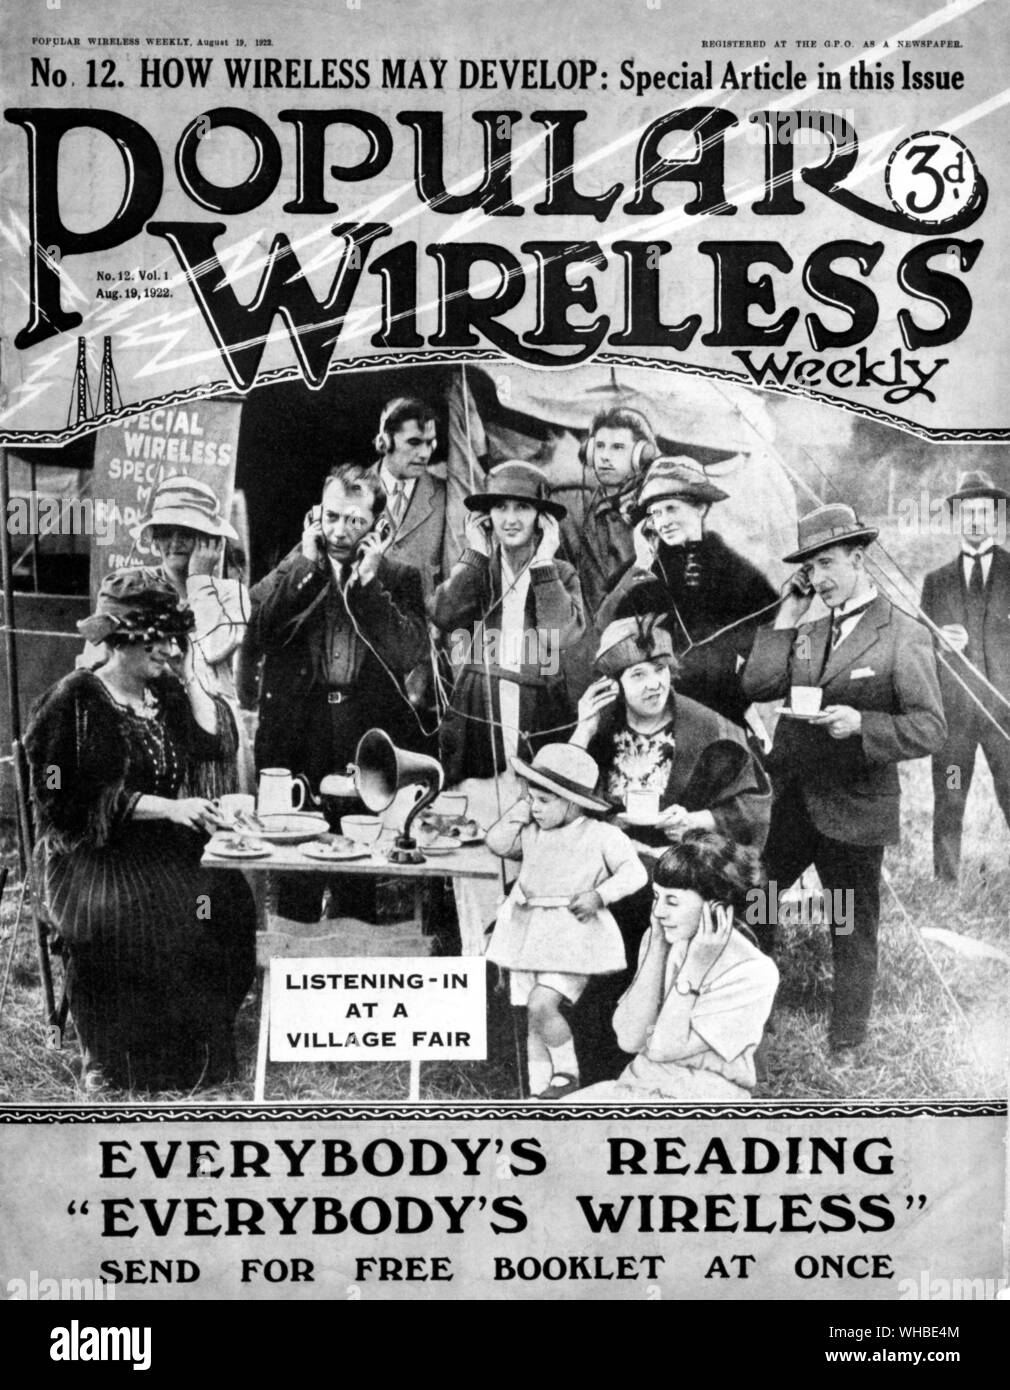 Front cover of Popular Wireless weekly, No. 12 vol. 1 19th August 1922 - How wireless may develop: Special article in this issue - 3d. (Just over 1p in decimal coinage) - picture shows an assortment of people listening-in at a village fair.. Stock Photo